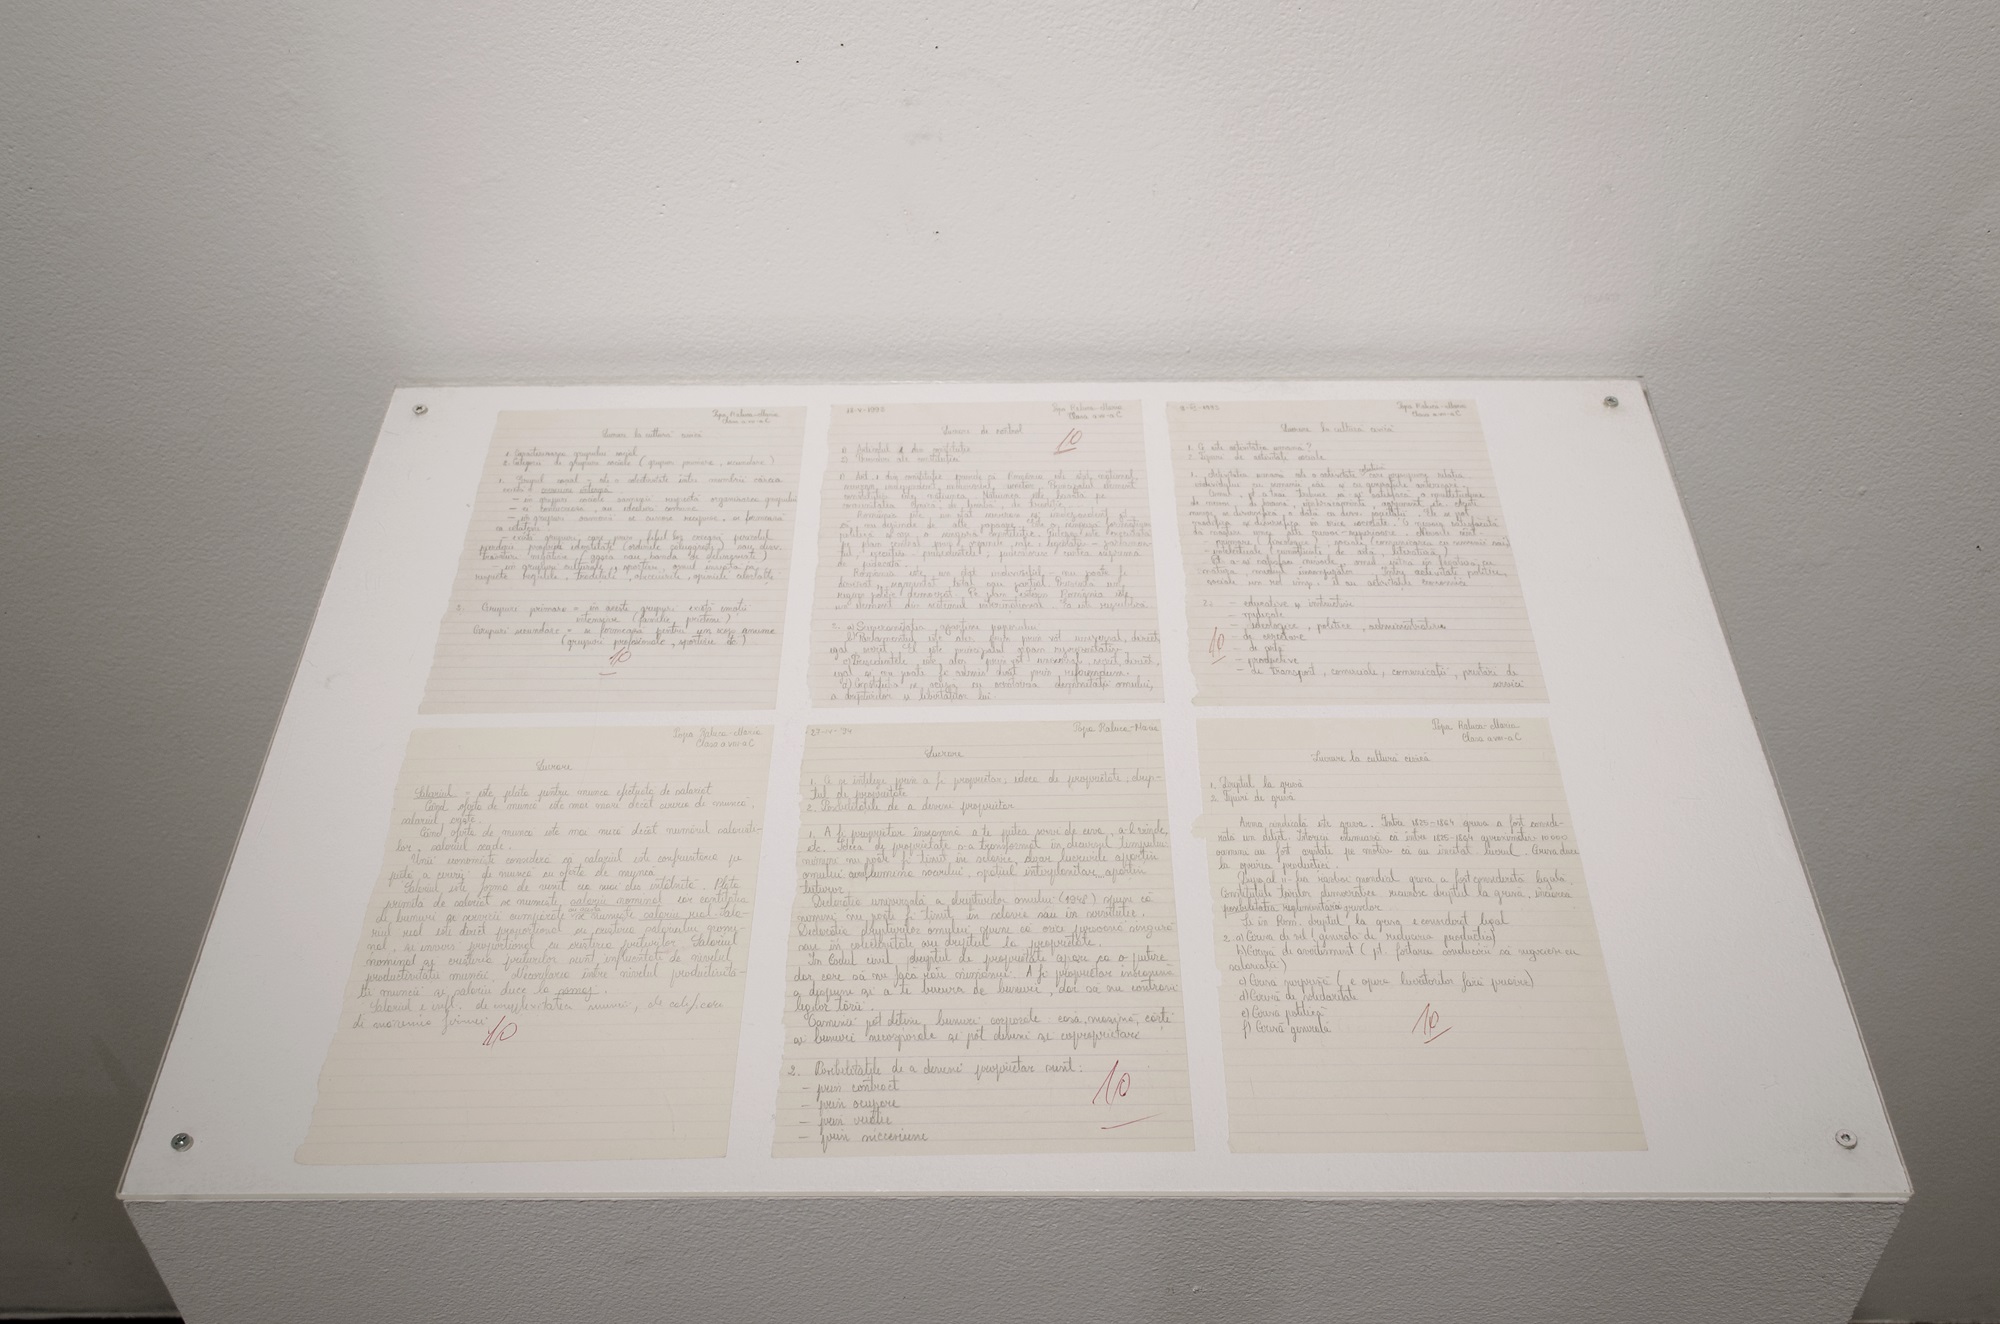 6 SCHOOL TEST PAPERS (Civic culture) (1993/2016) handwritten text on lined paper, approx. 21 x 14 cm each, Image copyright: Răzvan Anton